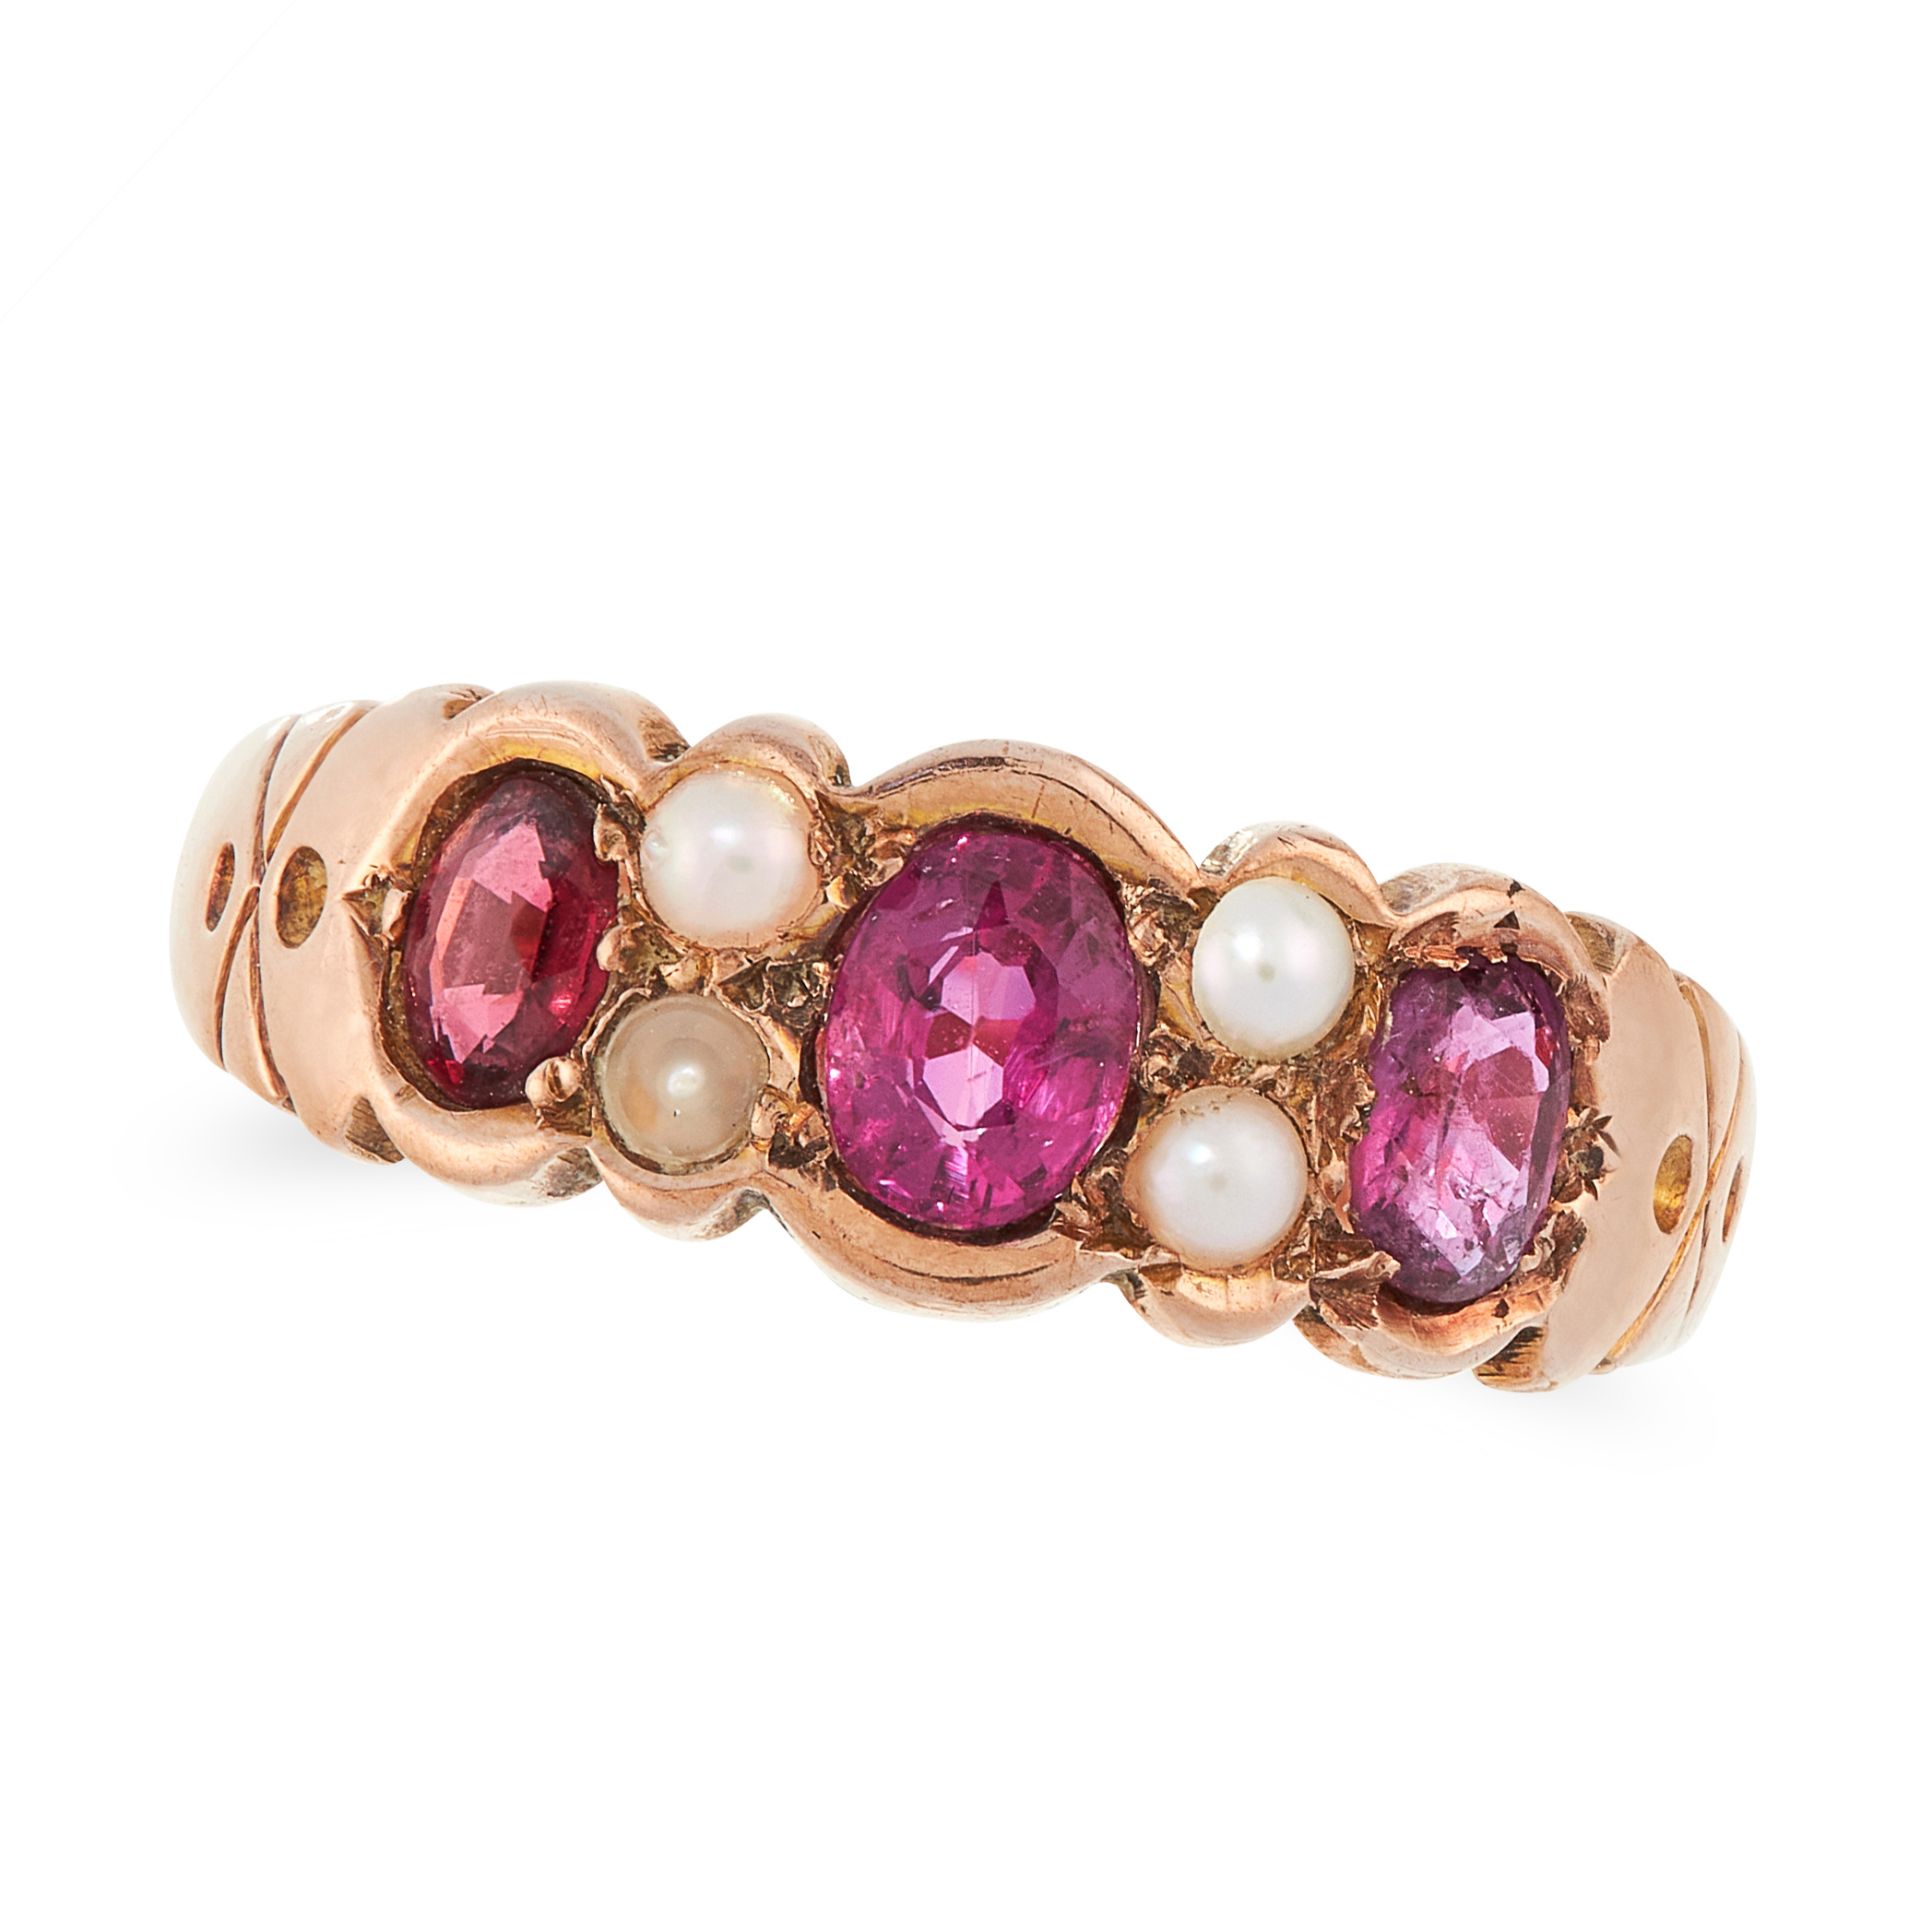 AN ANTIQUE GARNET AND PEARL RING in 9ct yellow gold, set with a row of alternating oval cut garnet